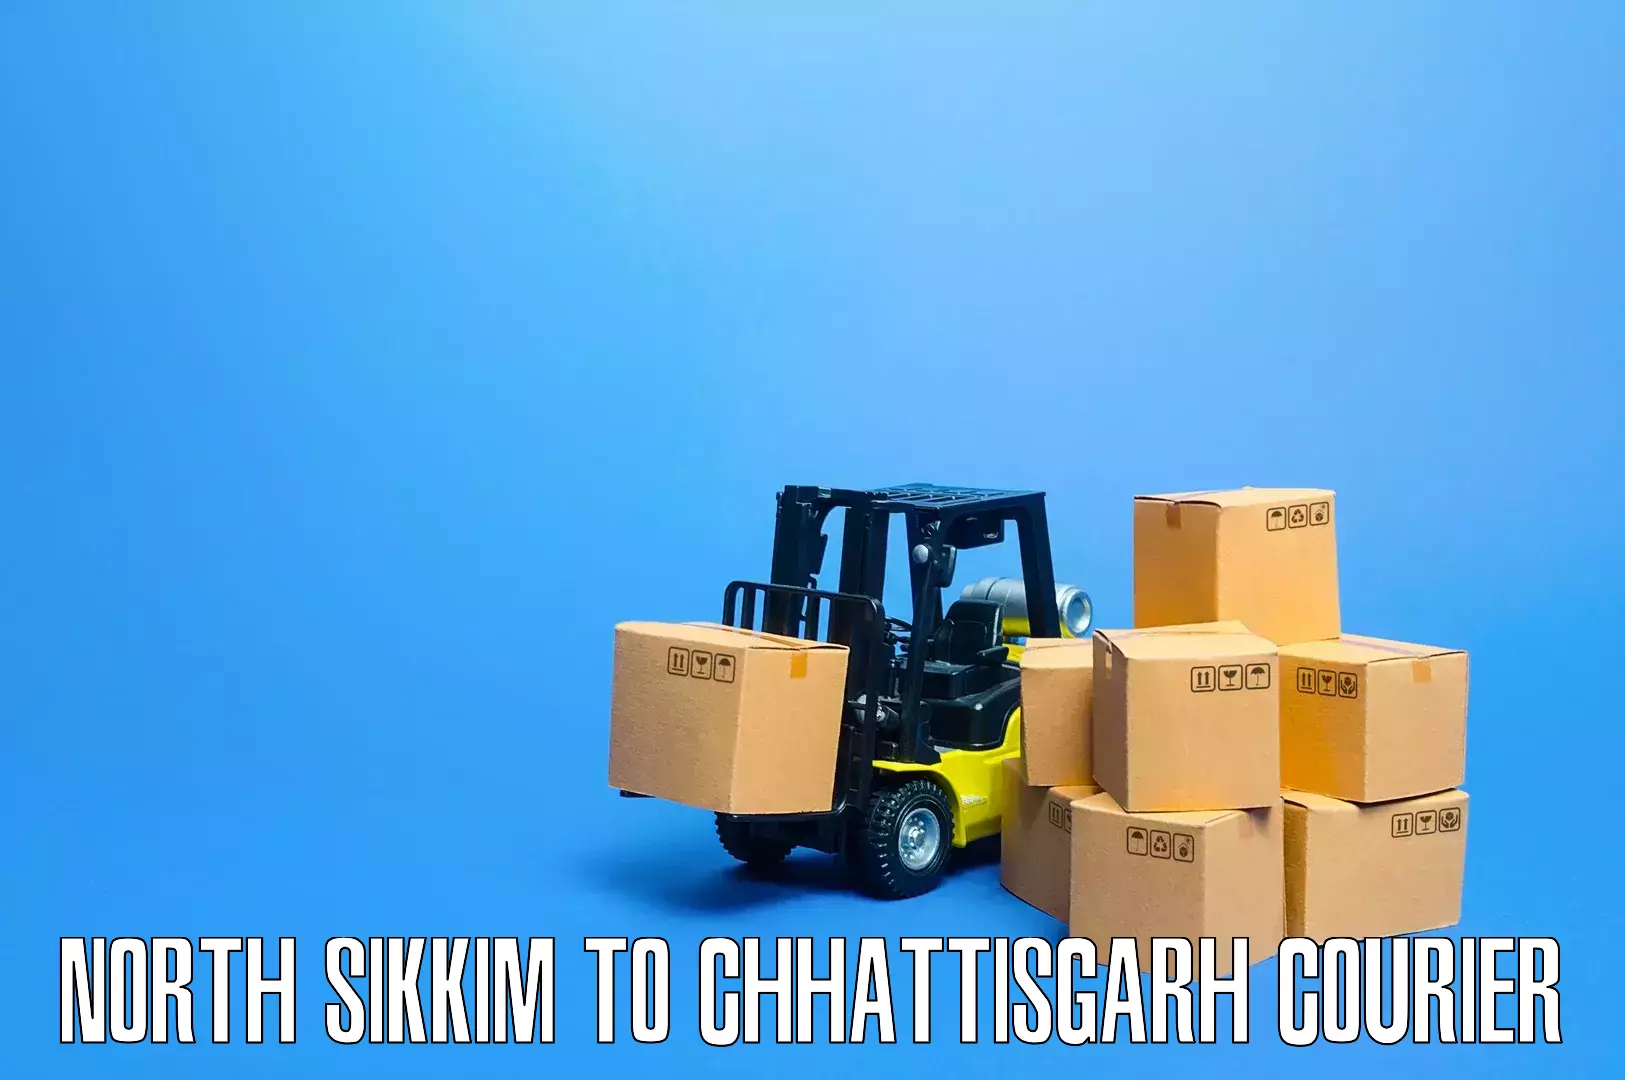 Quality relocation services North Sikkim to Amakhokhara